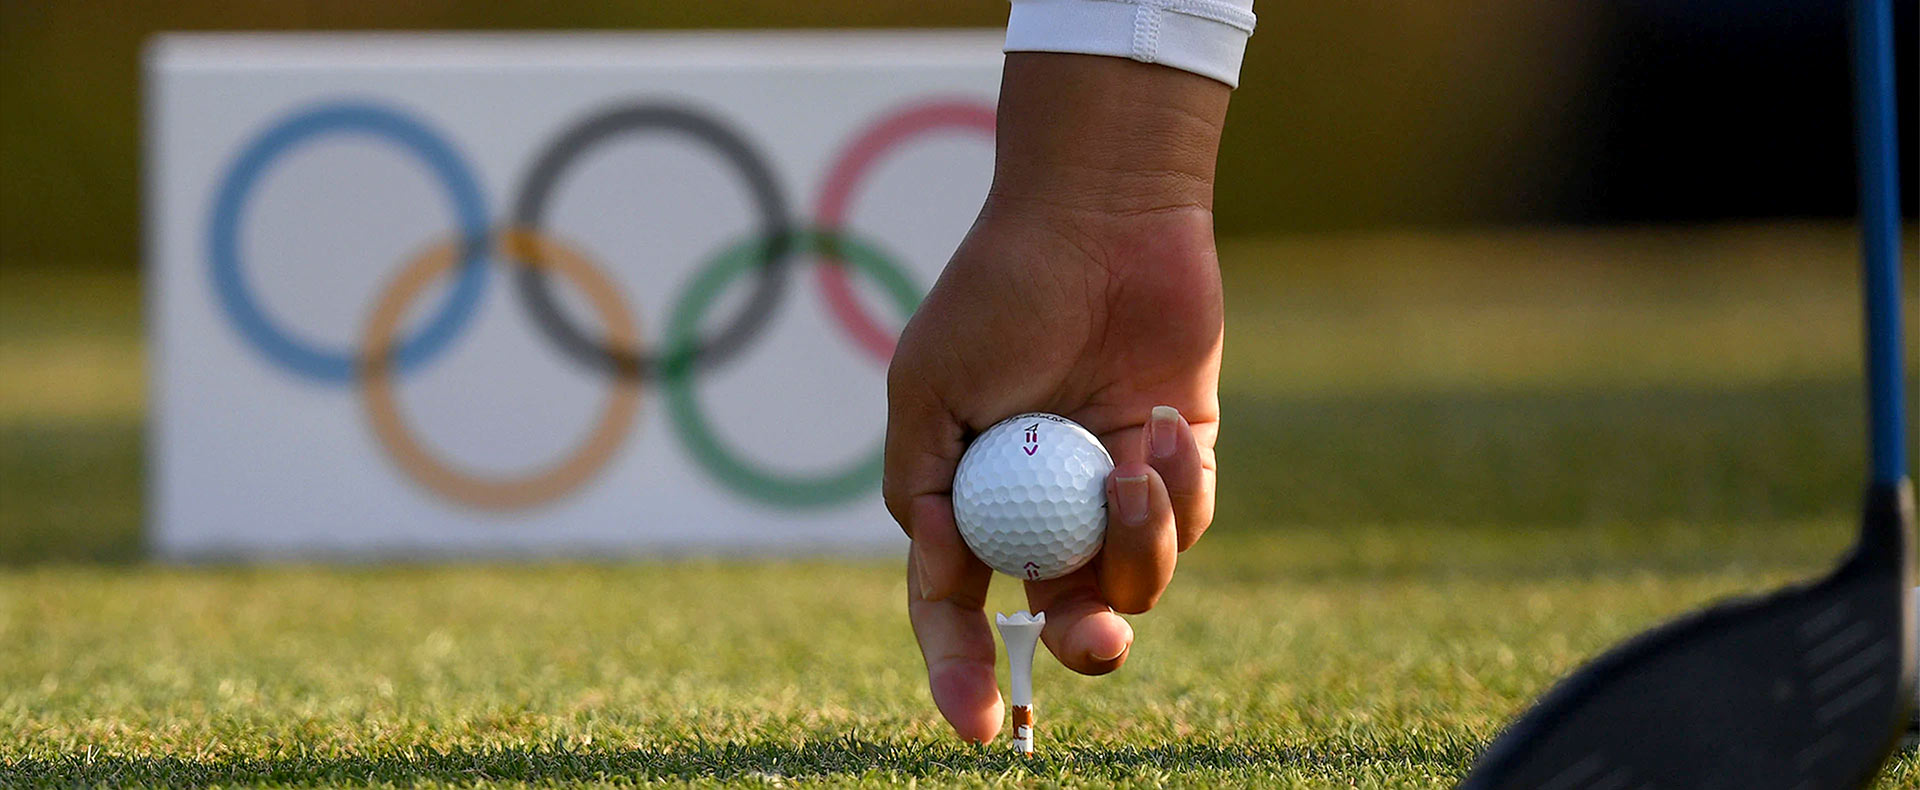 Olympic golf – national pride or side show?